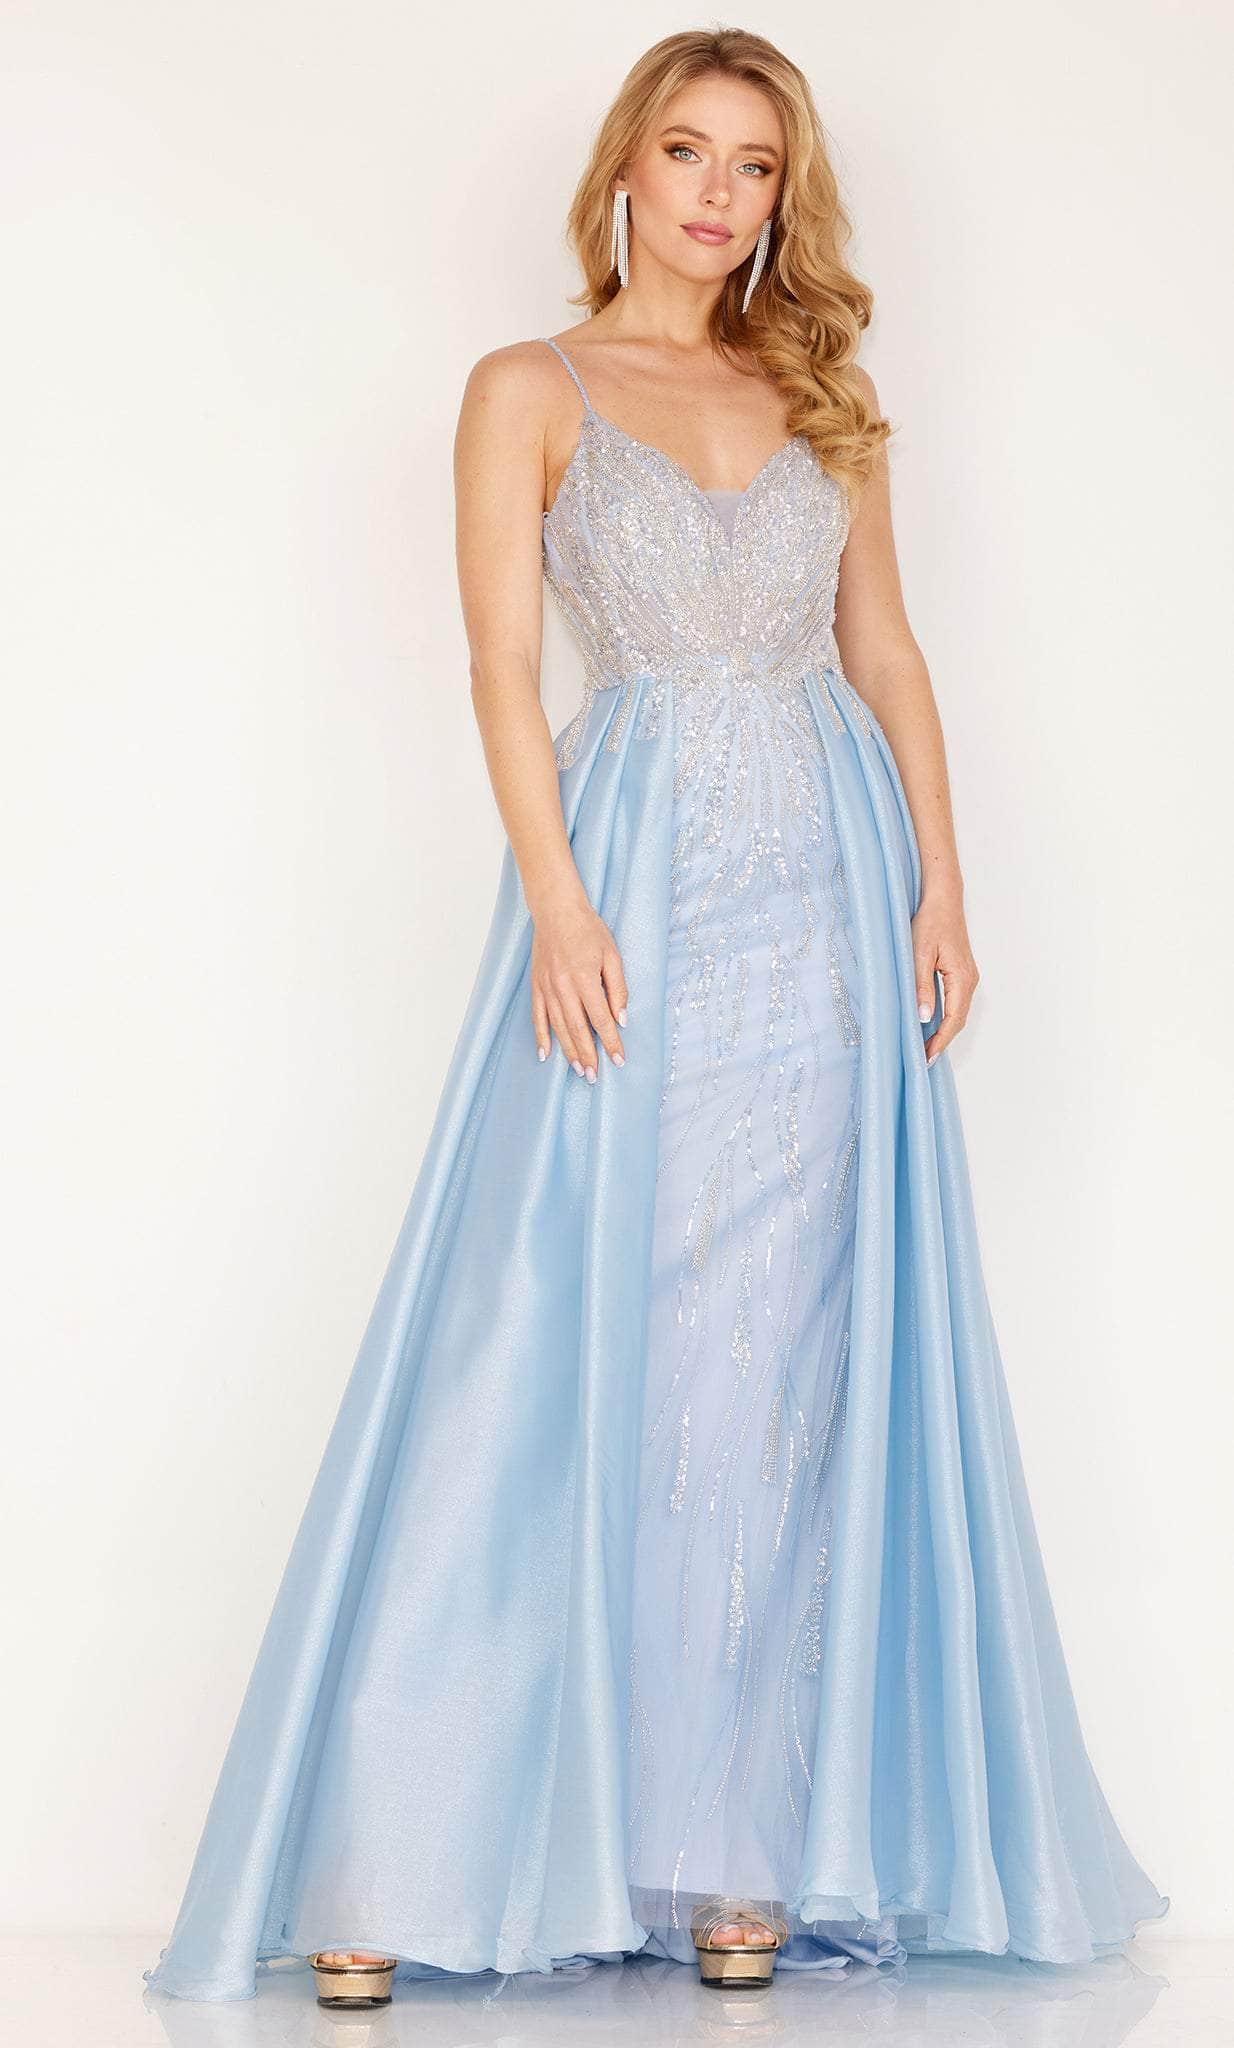 Image of Cecilia Couture 170 - Sleeveless Sequin Embellished Prom Dress